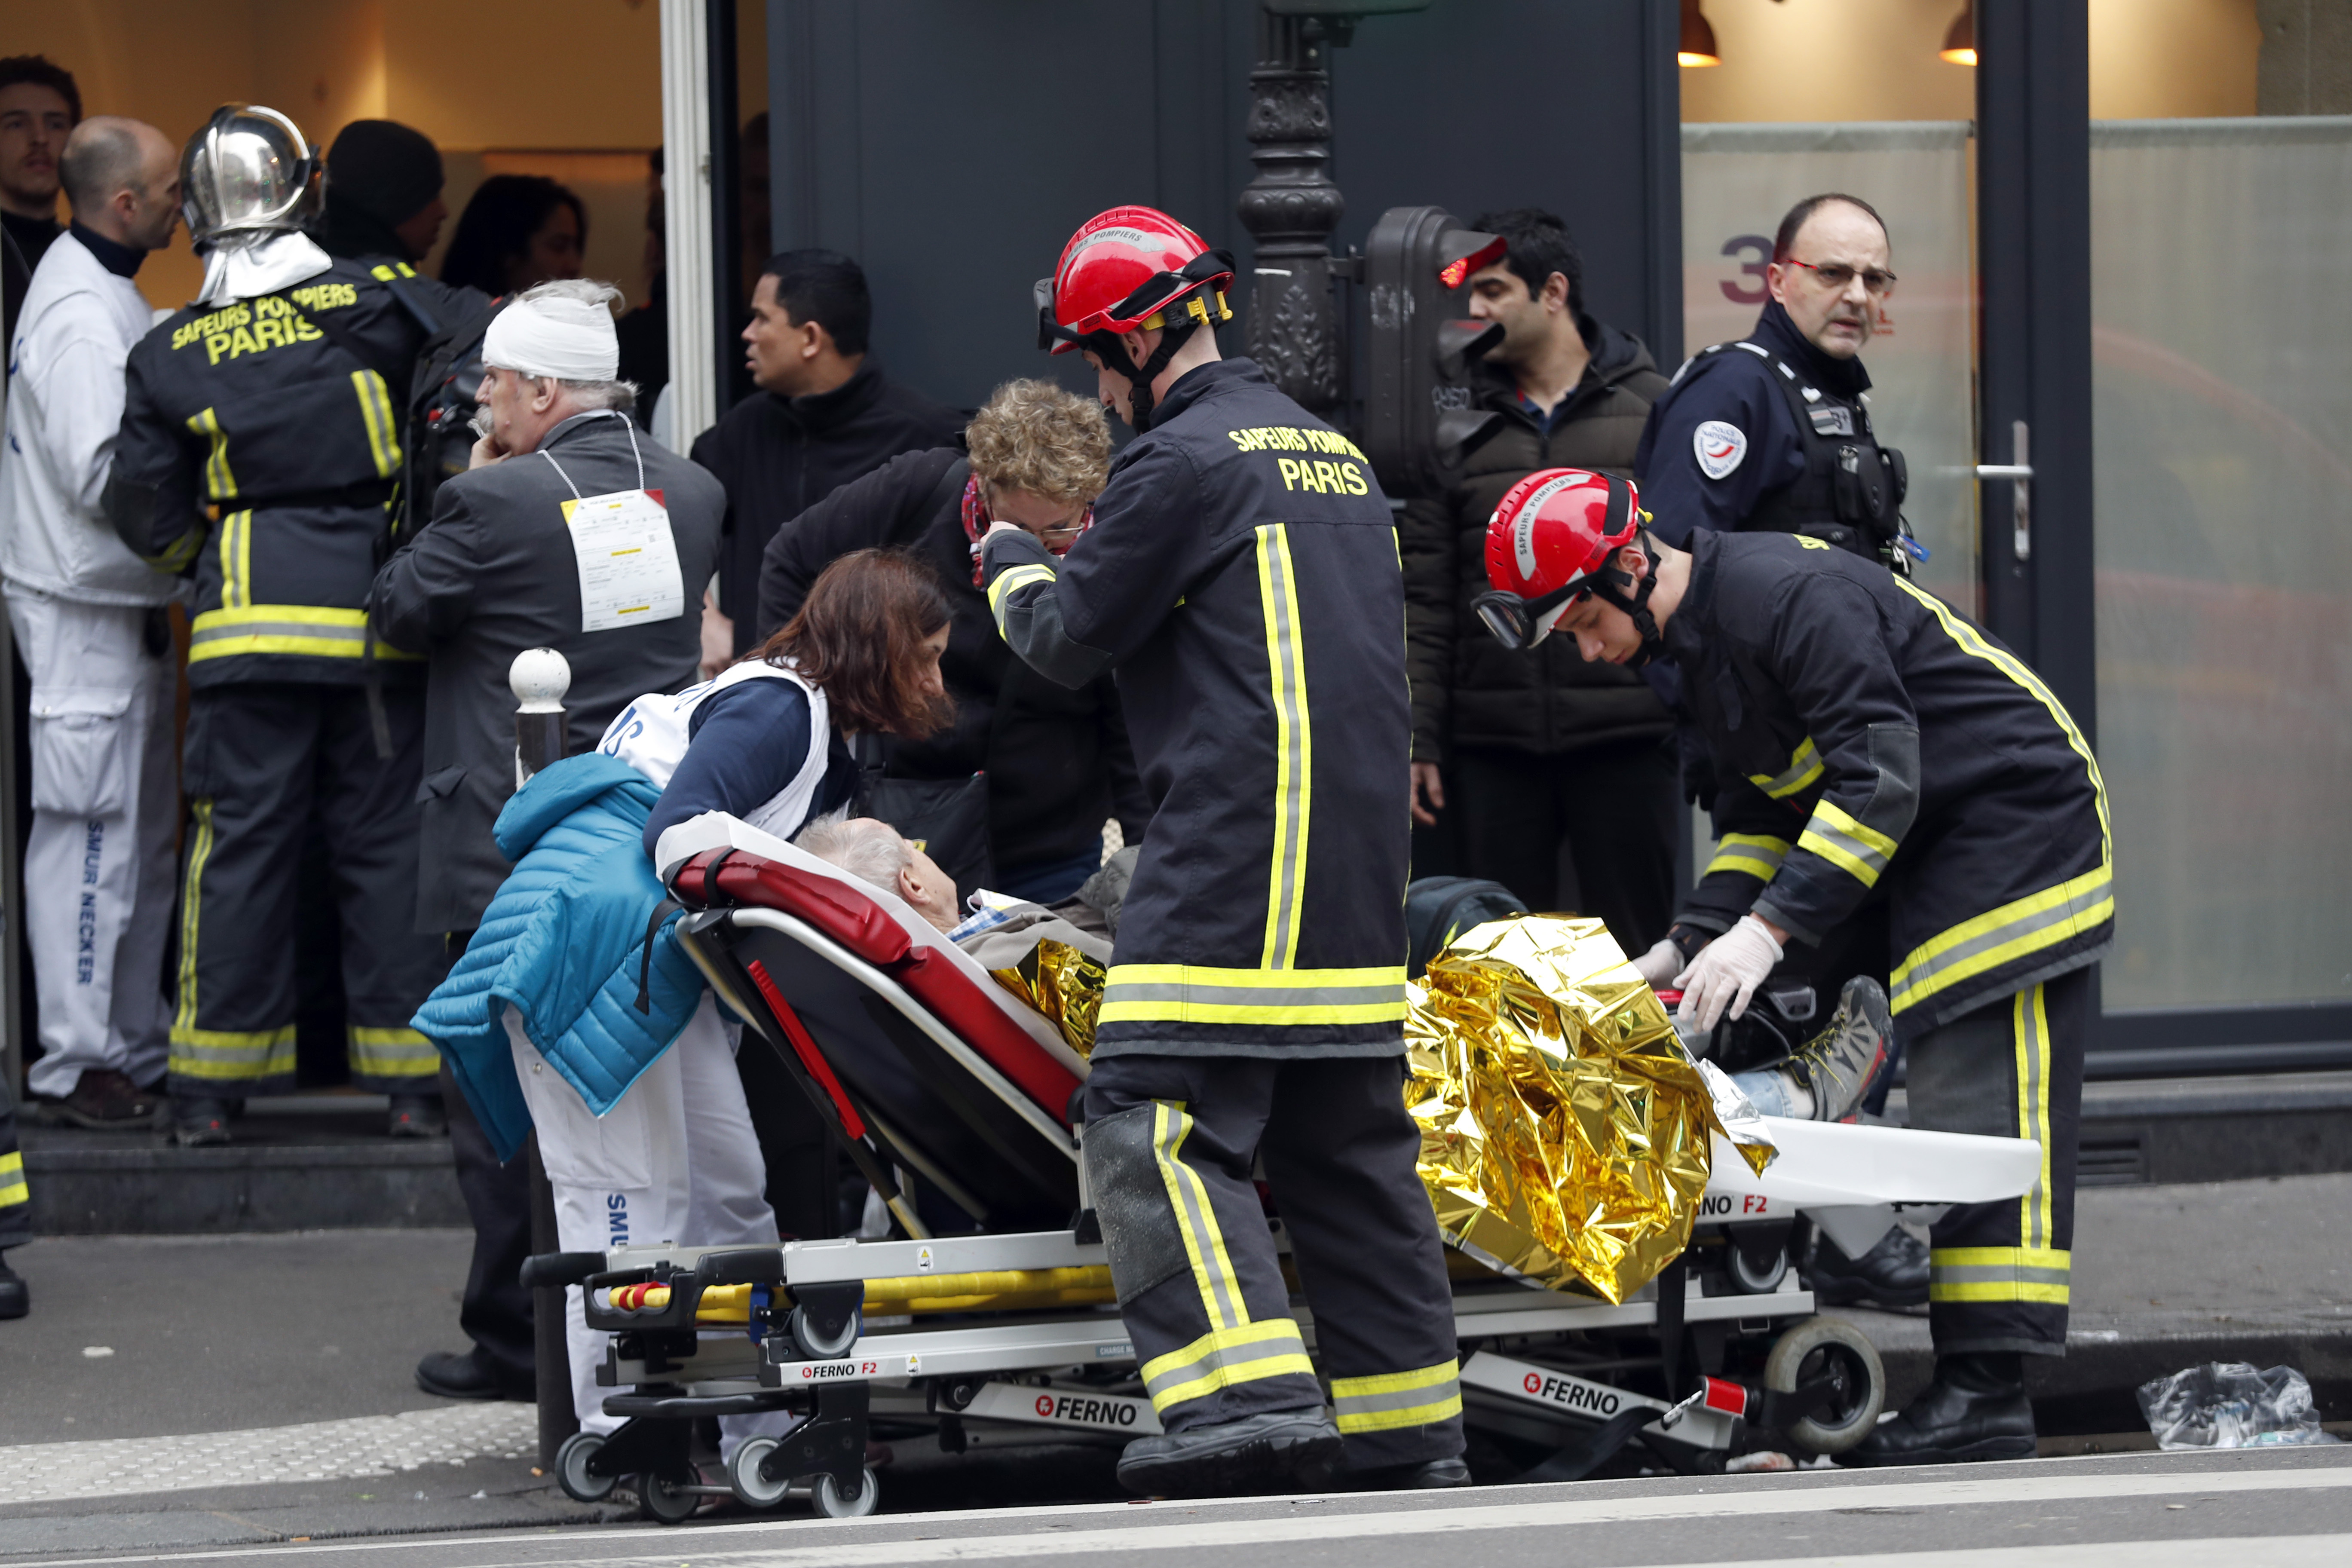 Medical staff and firefighters tend to a wounded man at the scene of a gas leak explosion in Paris, France, Saturday, Jan. 12, 2019. Paris police say several people have been injured in an explosion and fire at a bakery believed caused by a gas leak. (AP Photo/Thibault Camus)